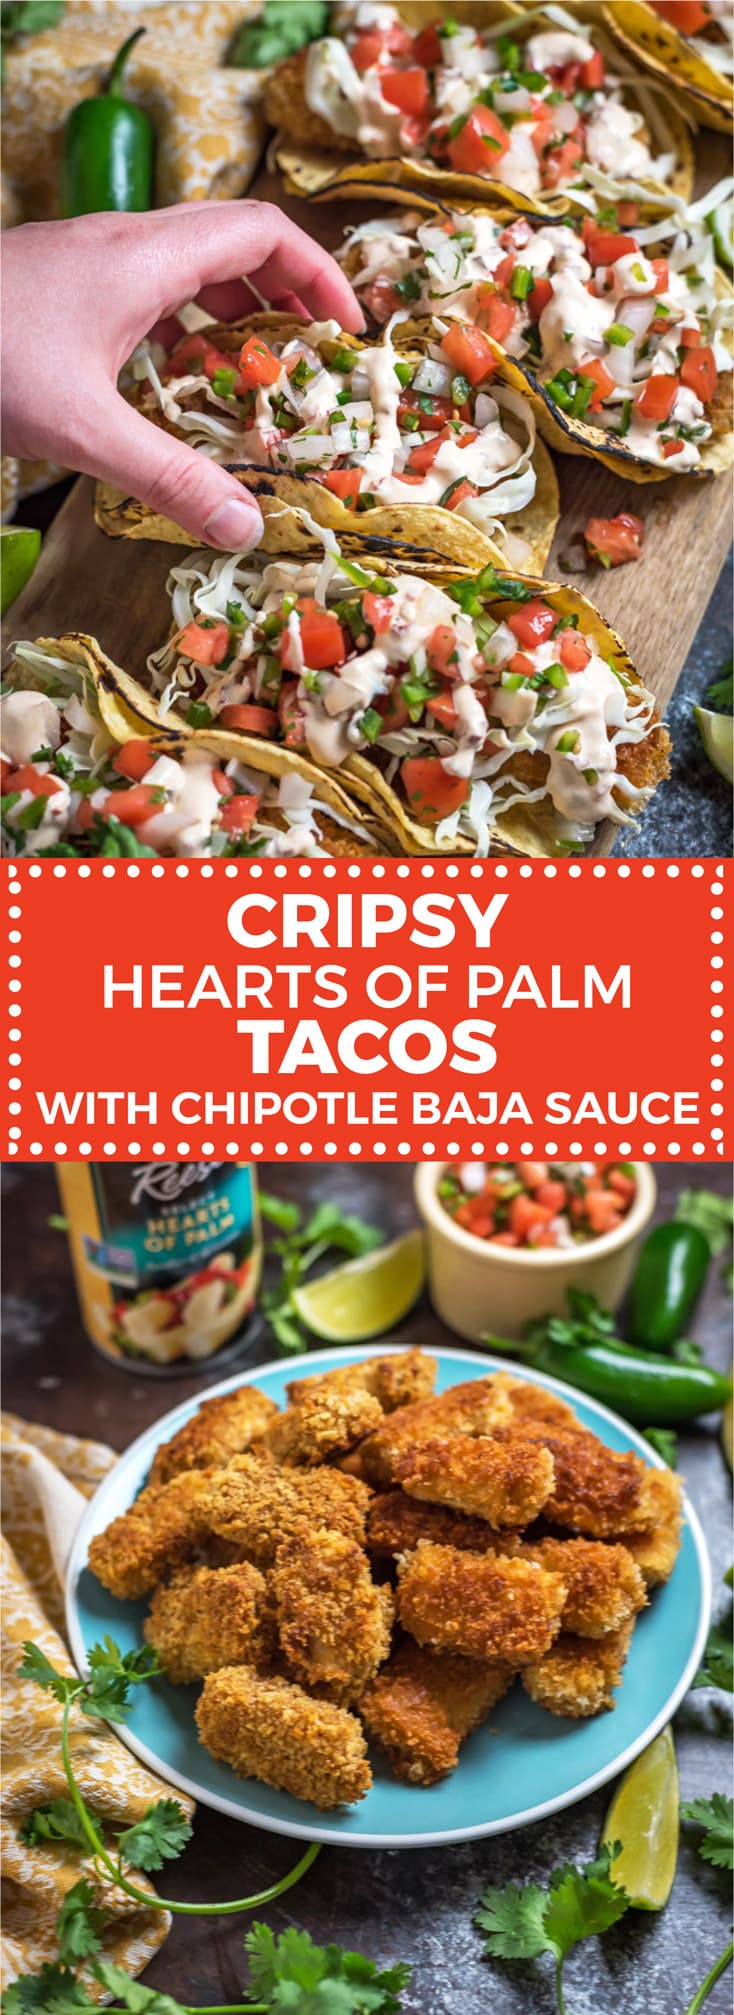 Crispy Hearts of Palm Tacos with Chipotle Baja Sauce. Have you ever tried hearts of palm in a taco before? They’re flavorful, tender on the inside and crisp on the outside, easy to make, vegetarian and vegan friendly, and they taste *fantastic*. Check out the recipe and how-to video! | hostthetoast.com